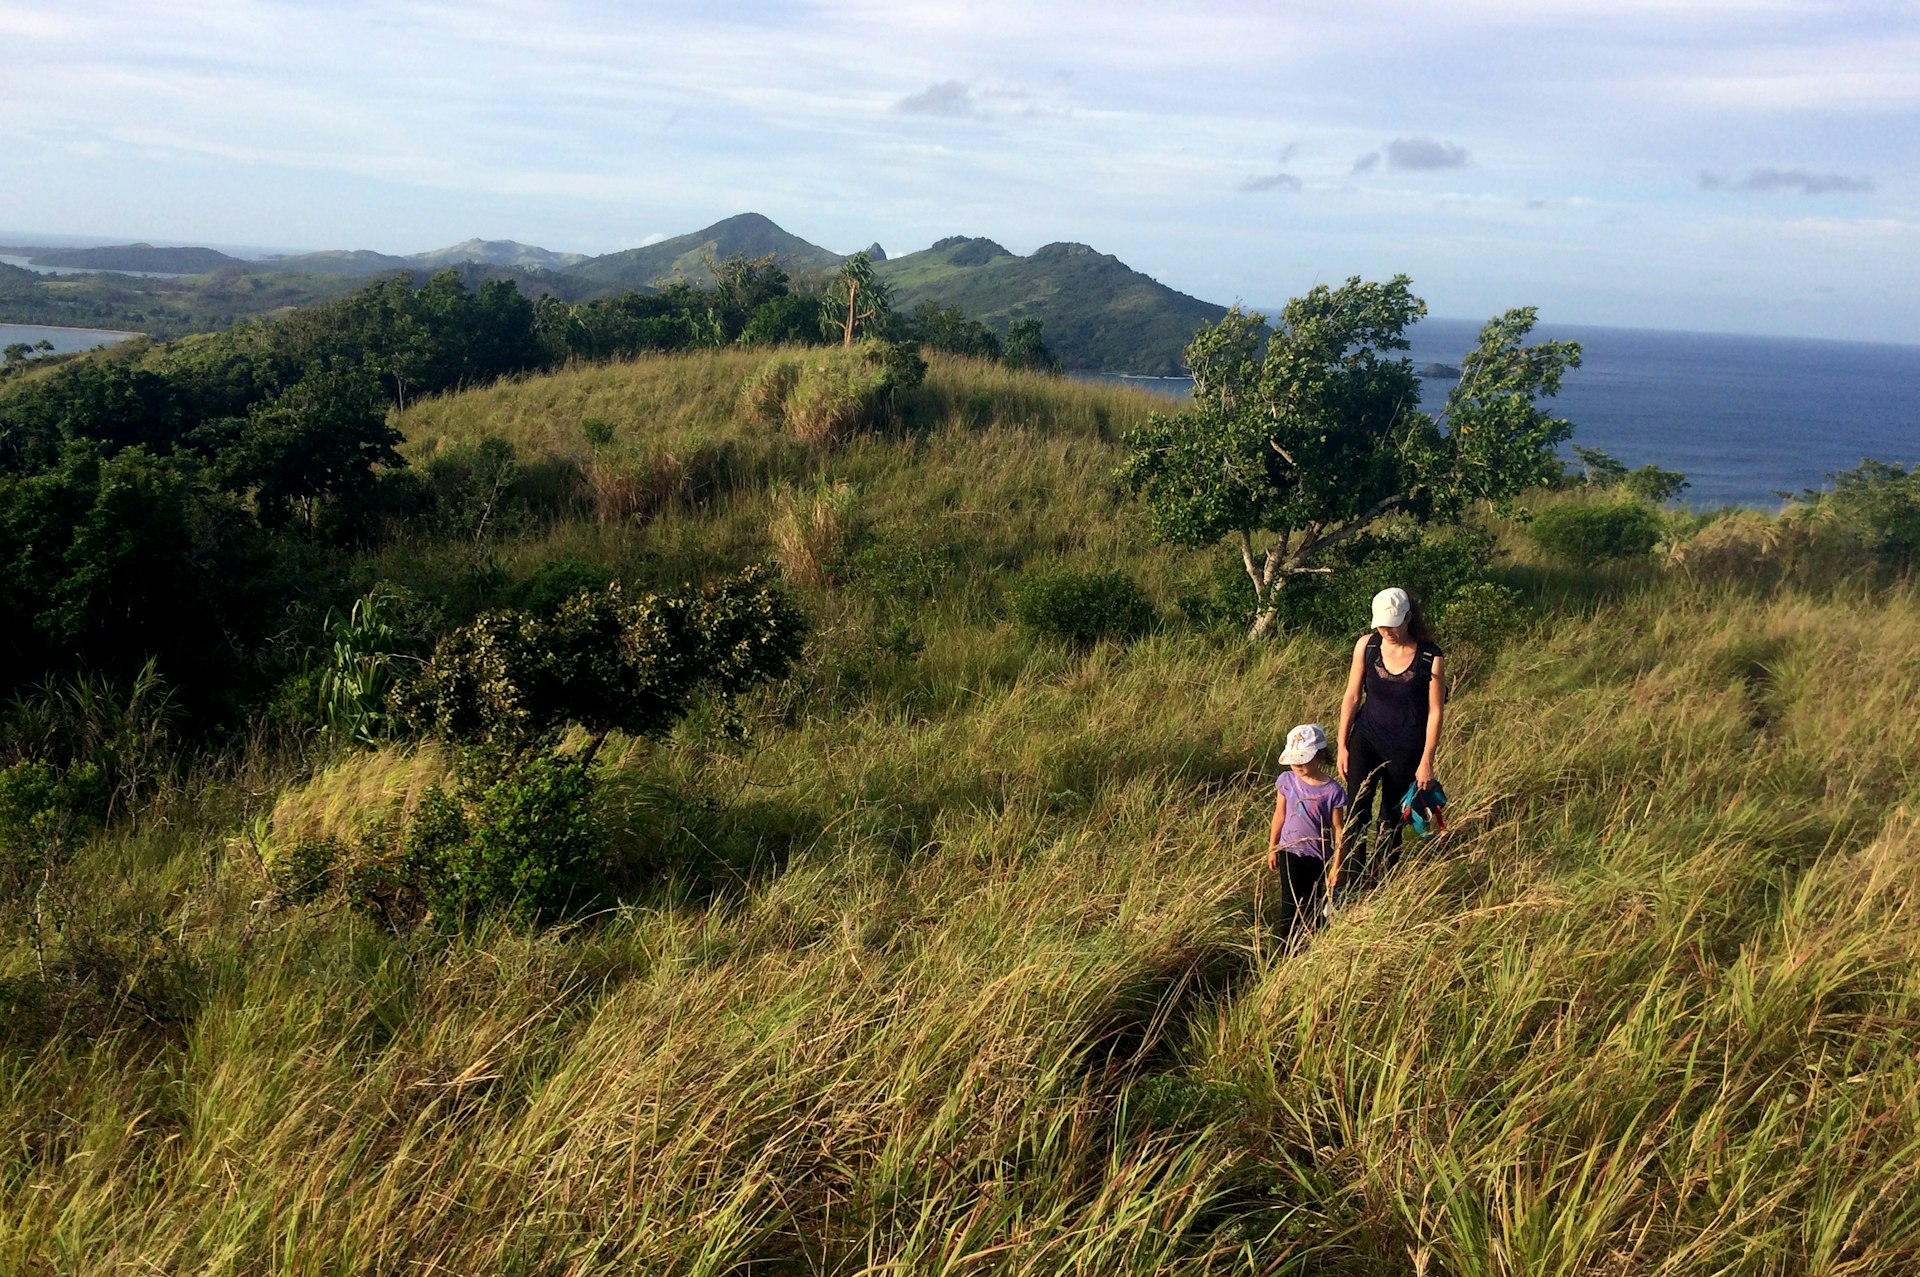 A mother and child hiking through the grass on one of the Yasawa Islands, Fiji 